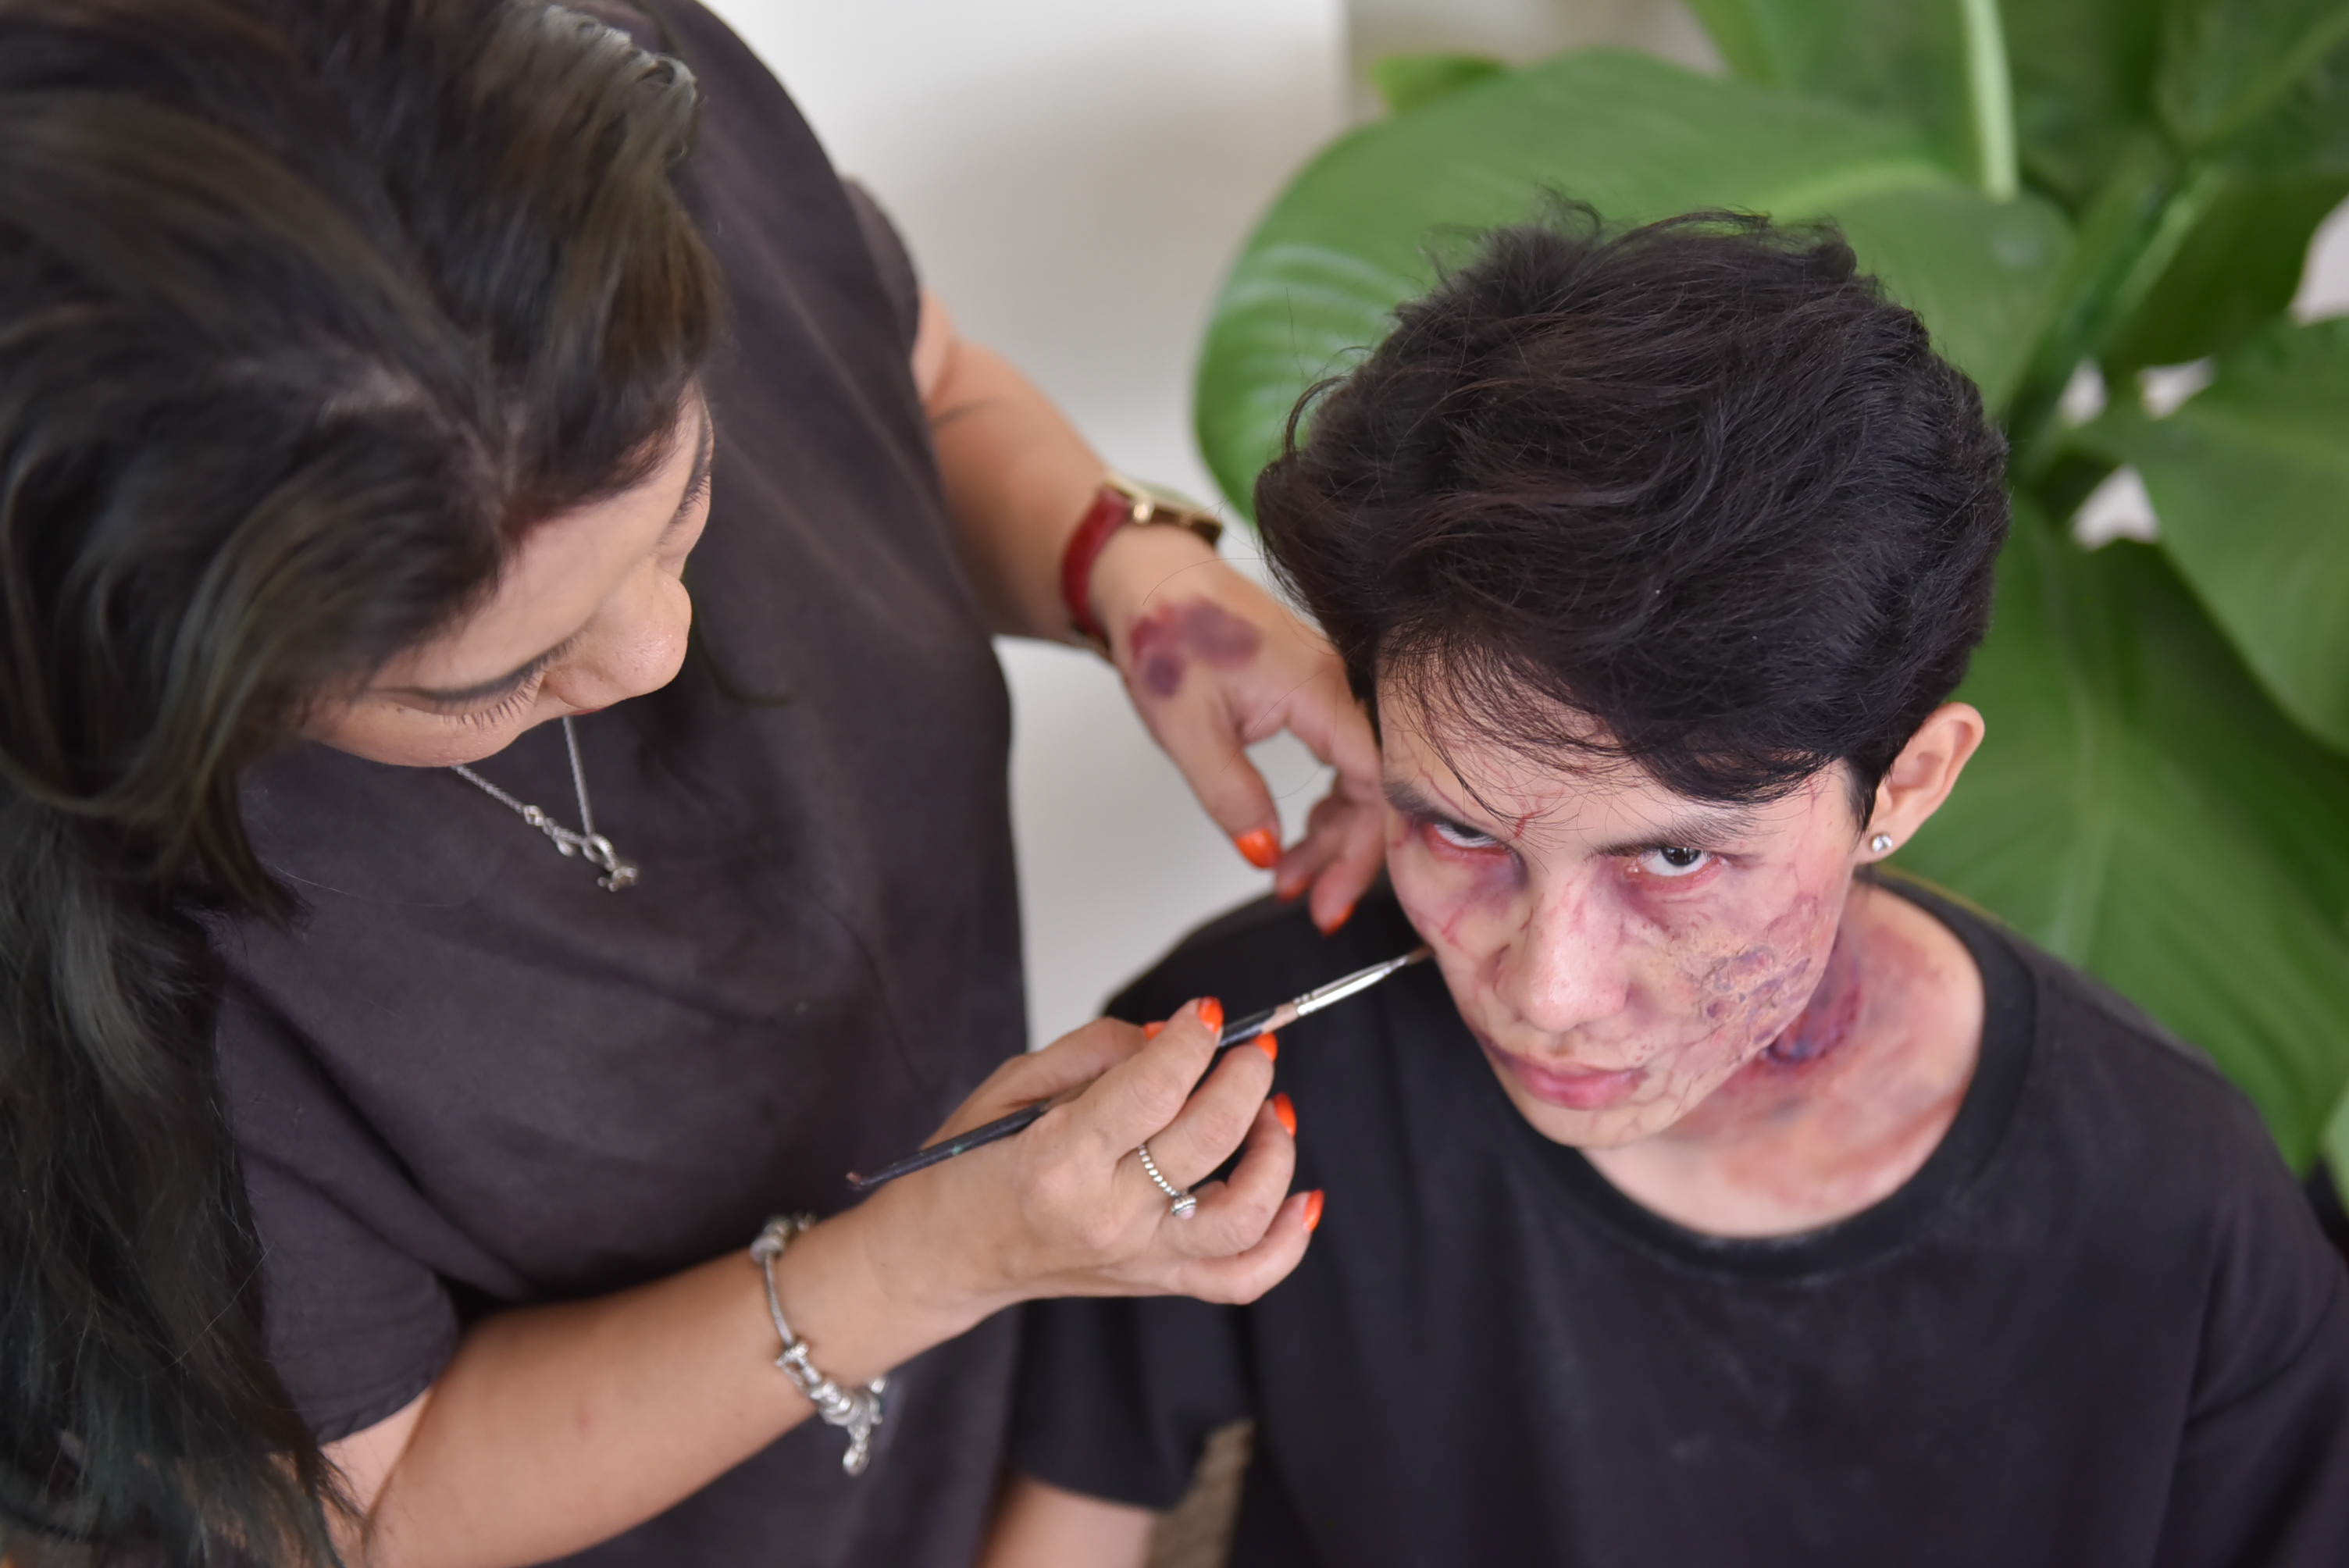 Nguyen Thi Thanh Hang does makeup for a zombie movie. Photo: Ngoc Phuong / Tuoi Tre News